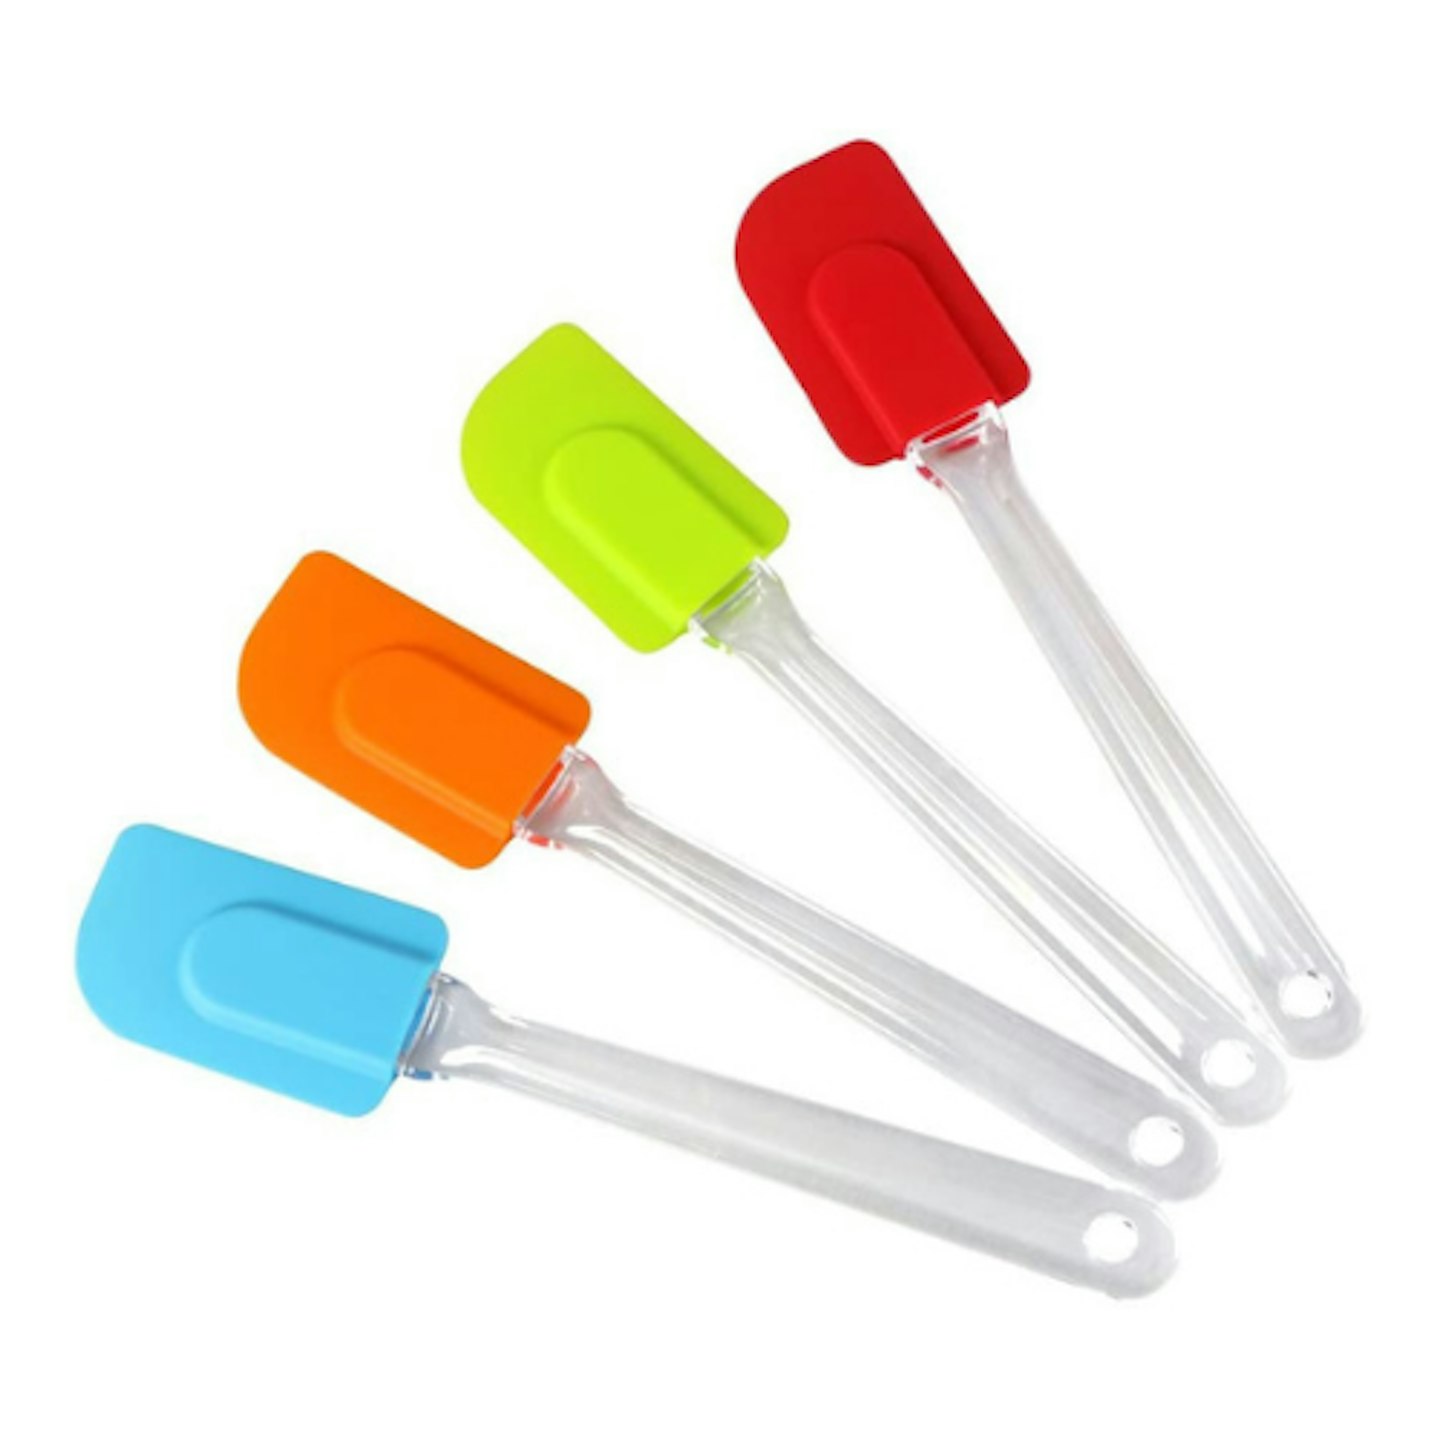 Vicloon Silicone Spatula Set on a white background.